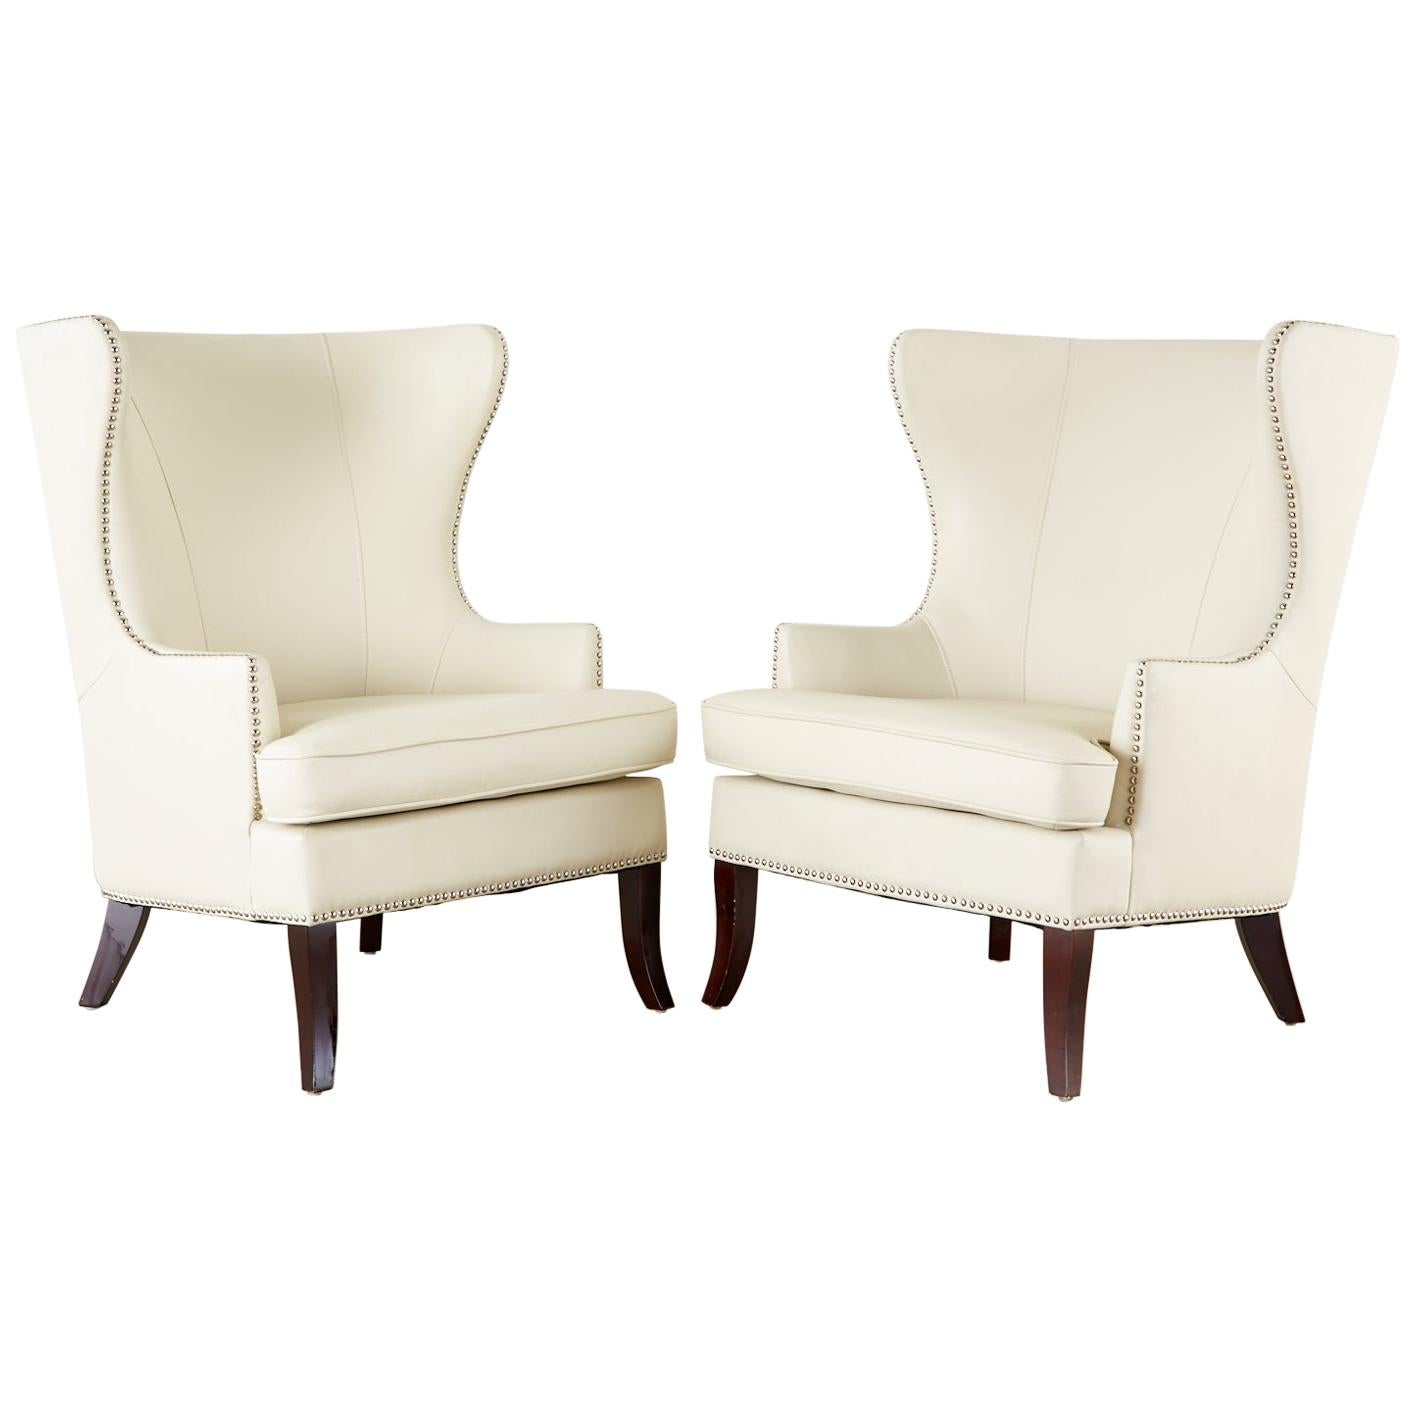 Modern White Wingback Lounge Chairs, Black Leather Wingback Chair Modern Design